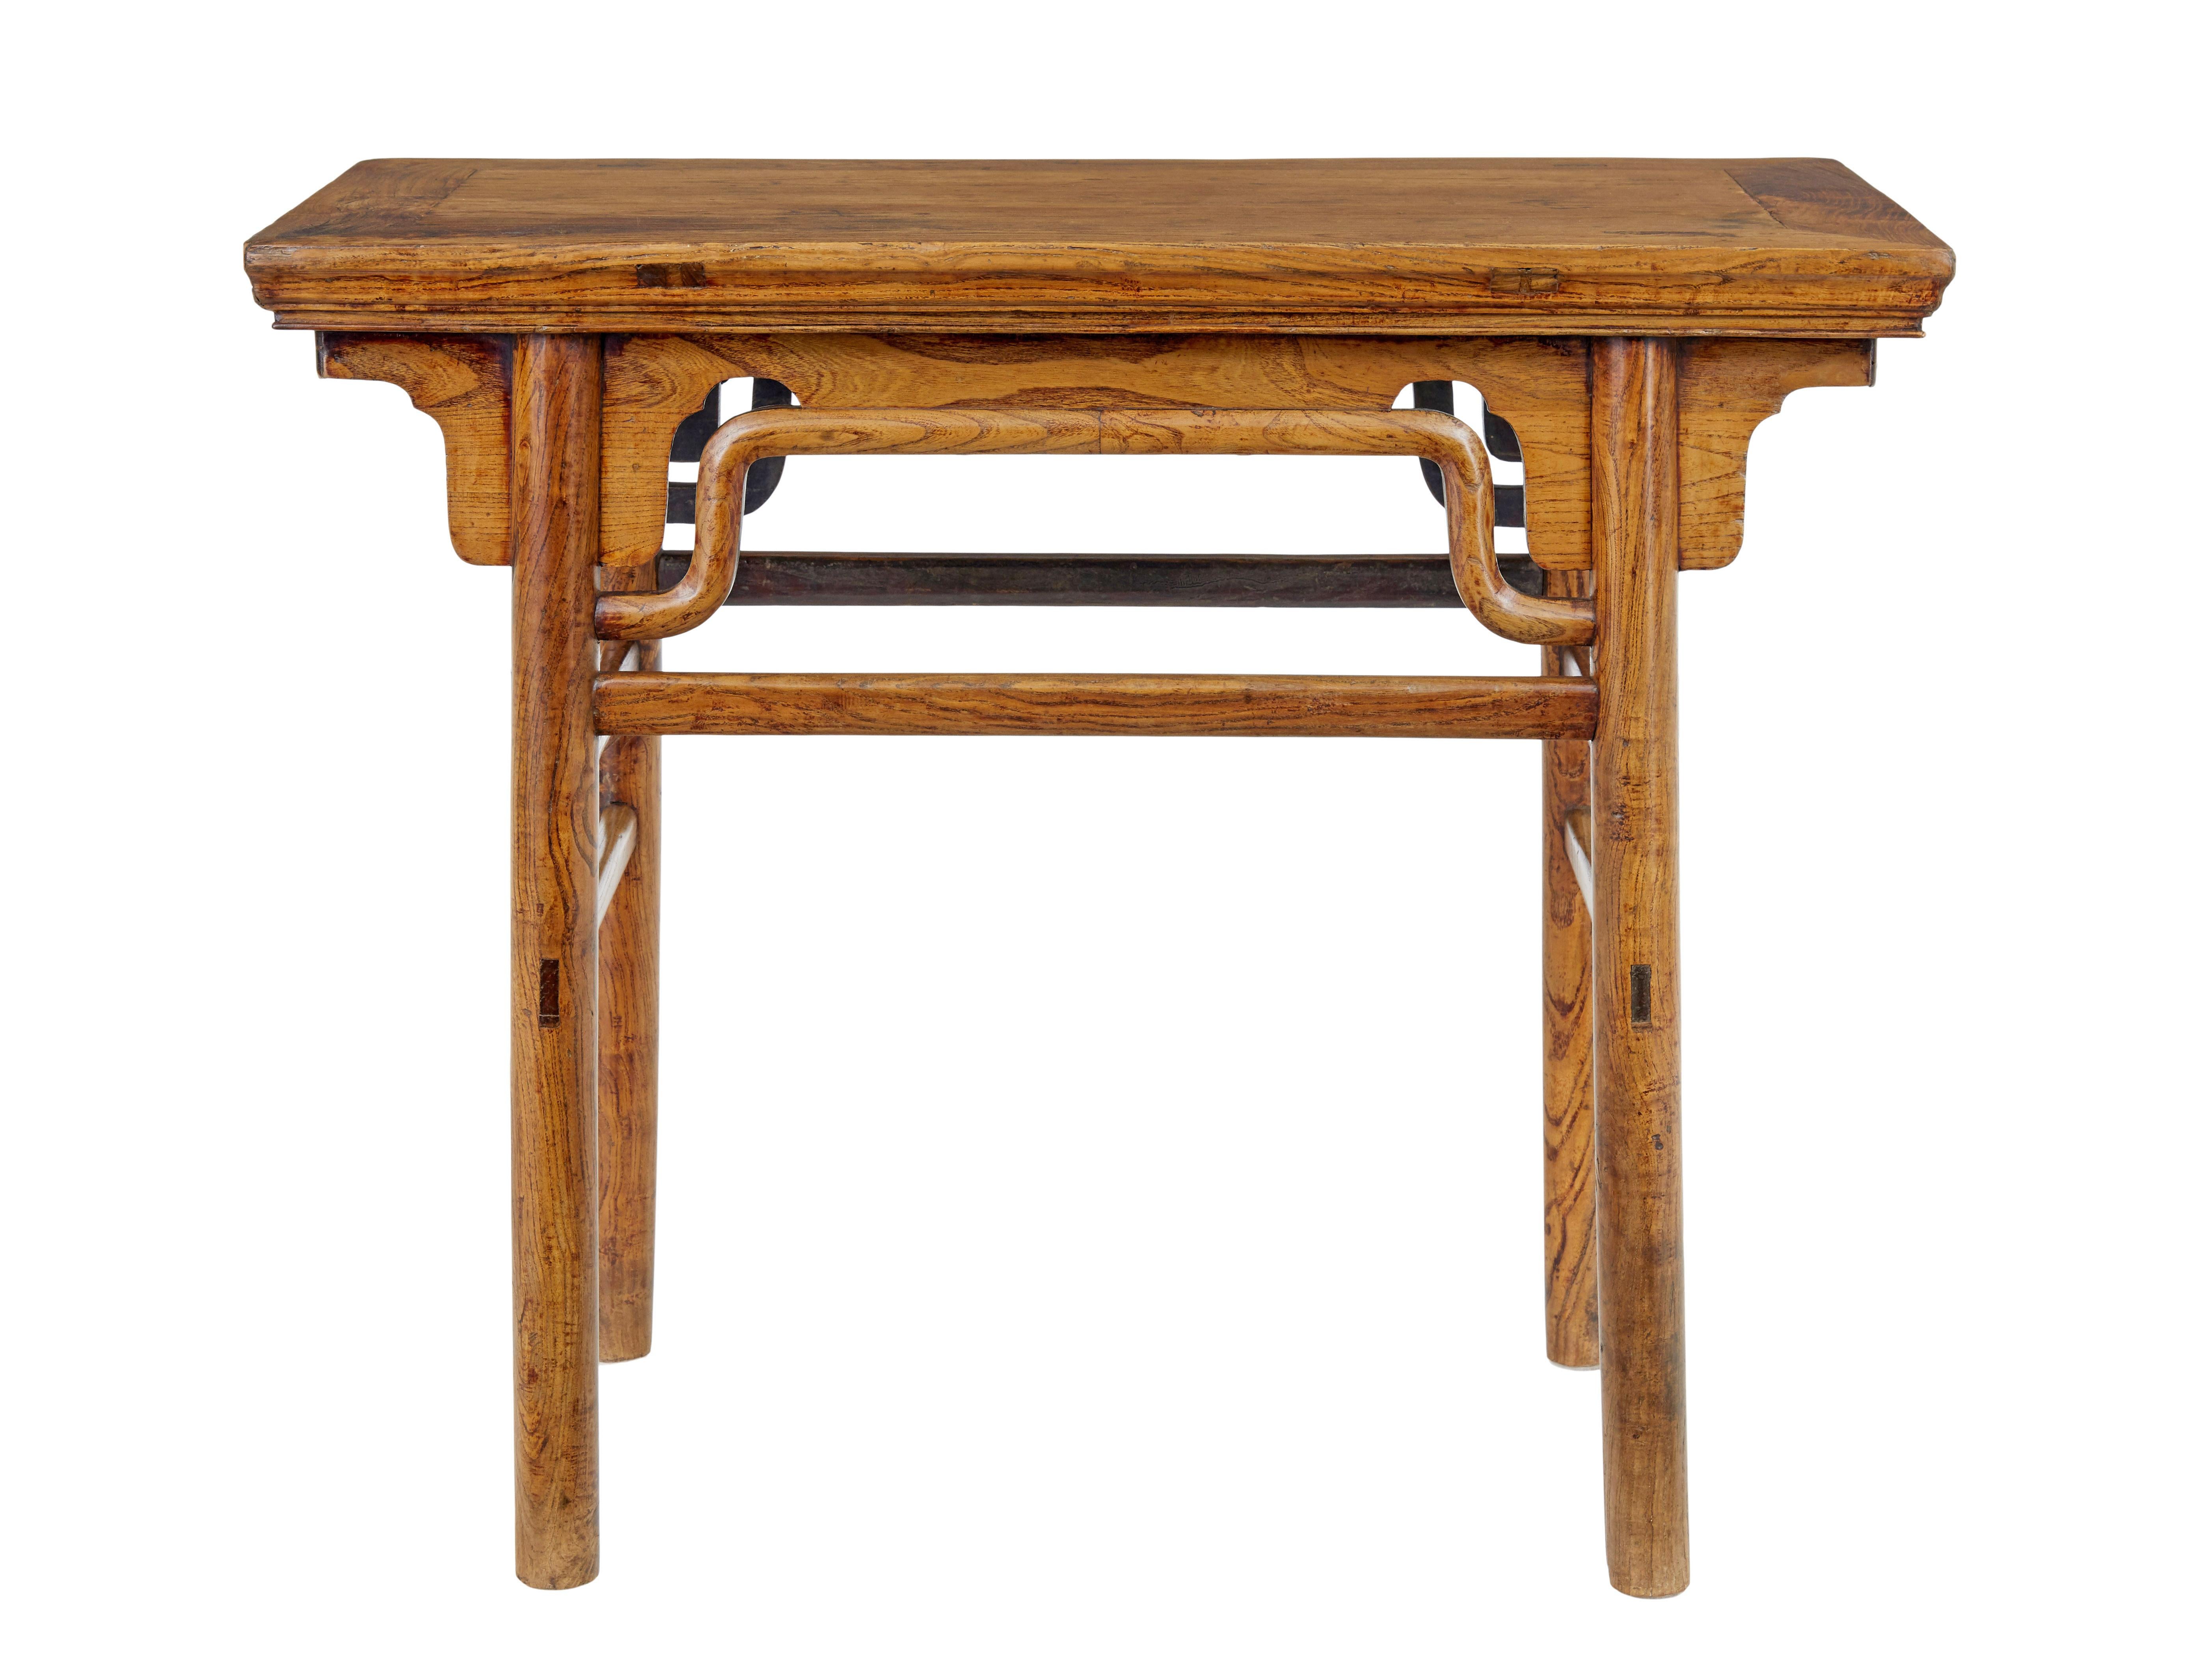 19th century Chinese carved elm occasional table, circa 1870.

Qing period table with good colour and patina.

Rectangular top and shaped elm decoration below the freize. Standing on rounded legs united by stretchers.

Areas of surface fading